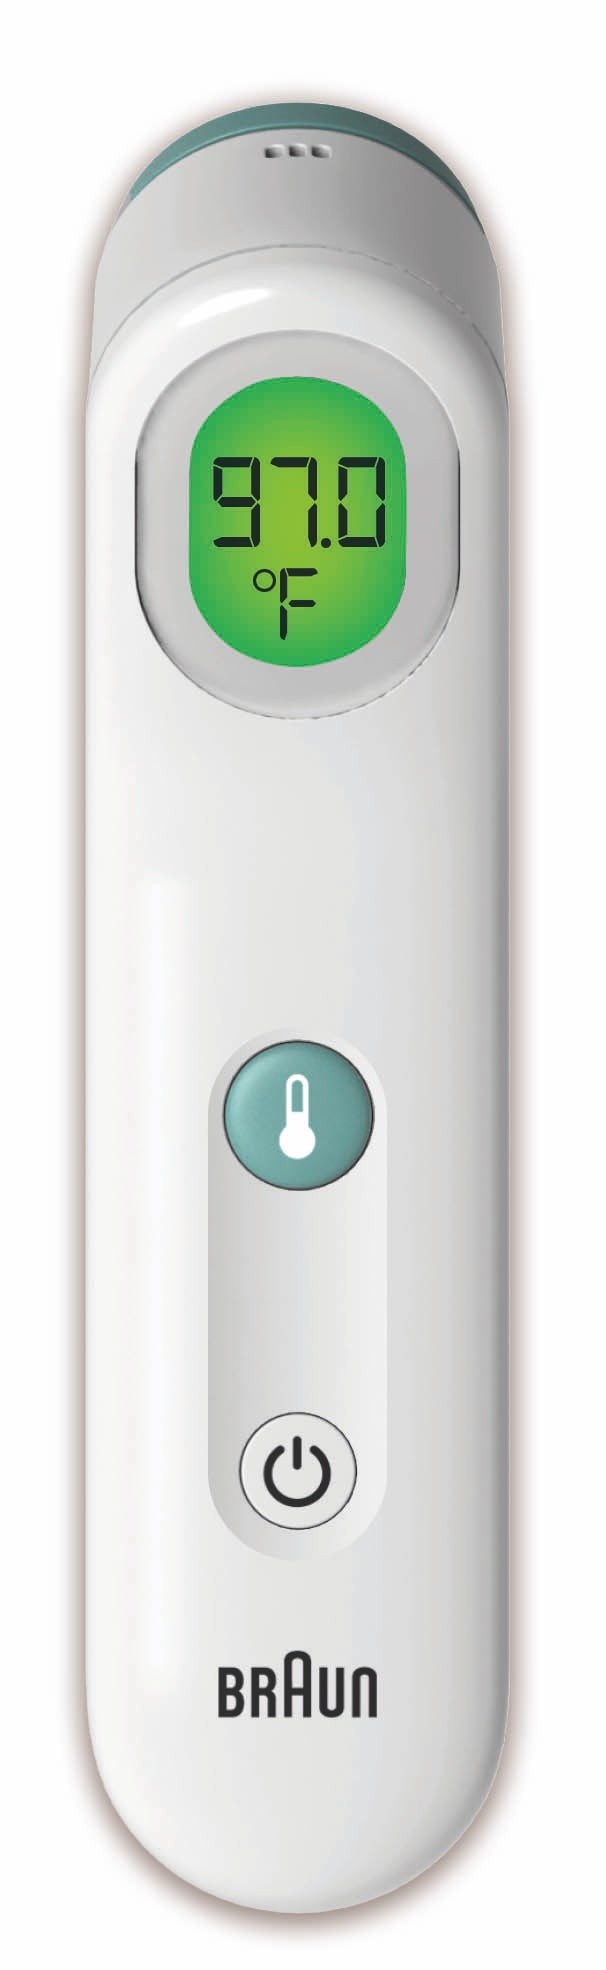 Forehead Thermometer w/ Fever Guidance System